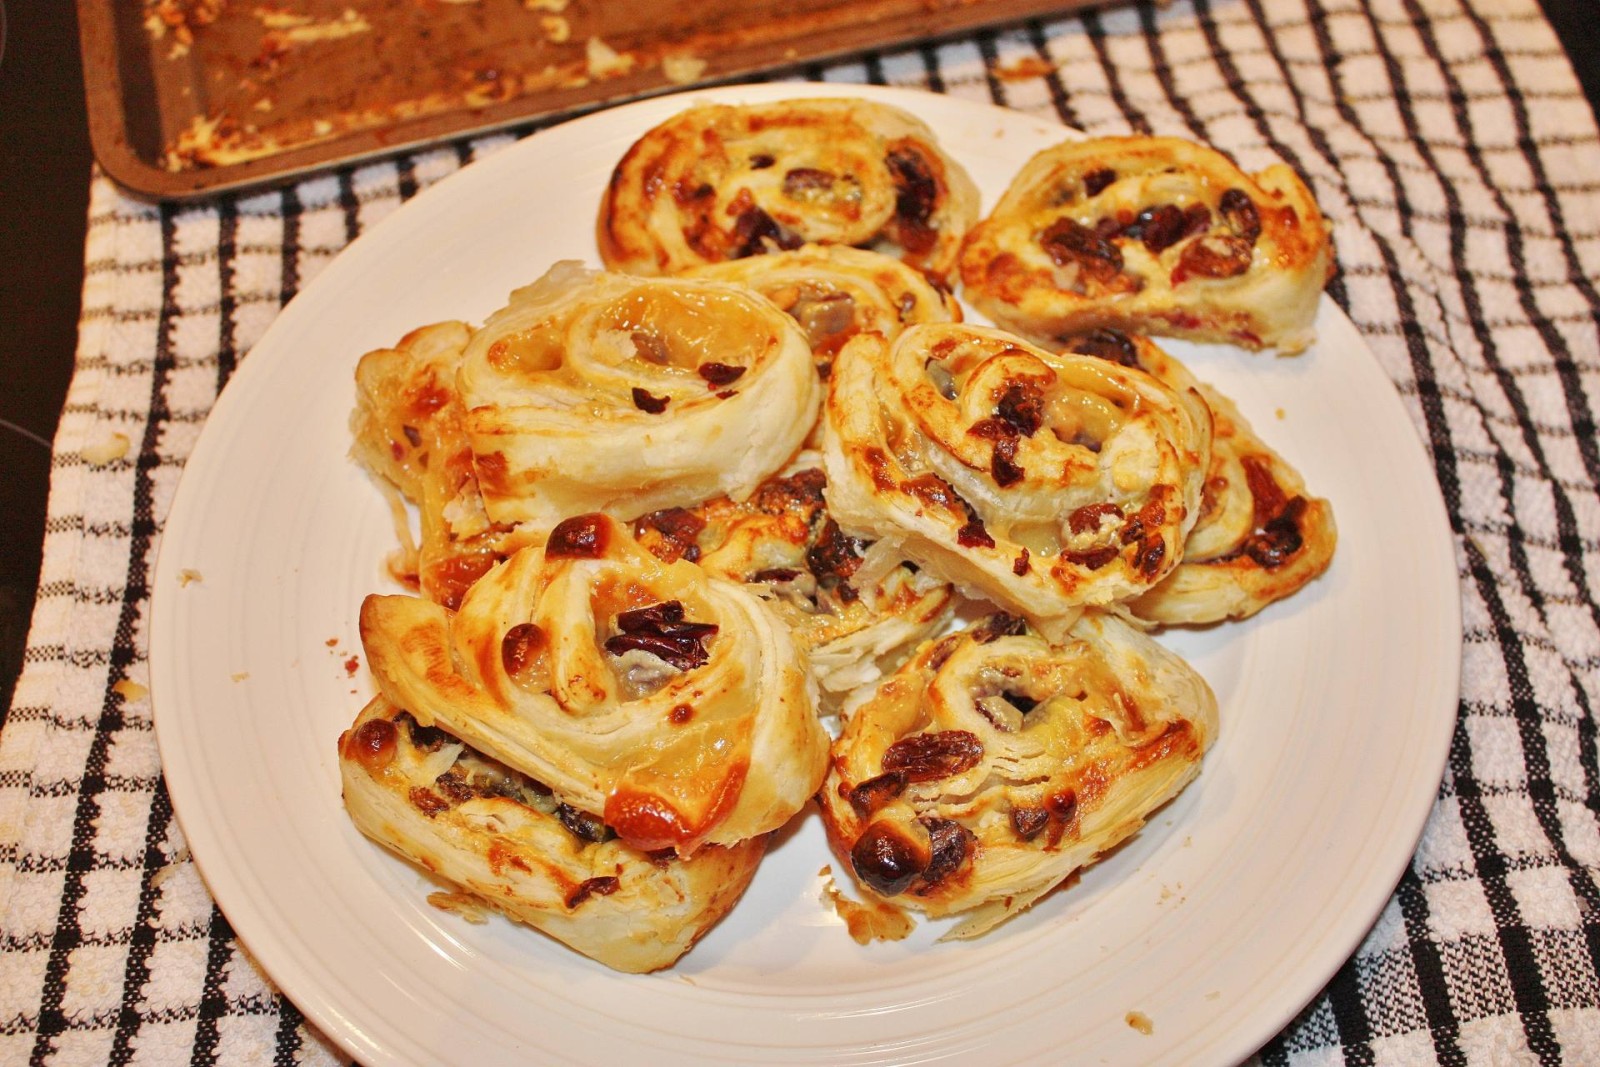 Brie and cranberry pinwheel14